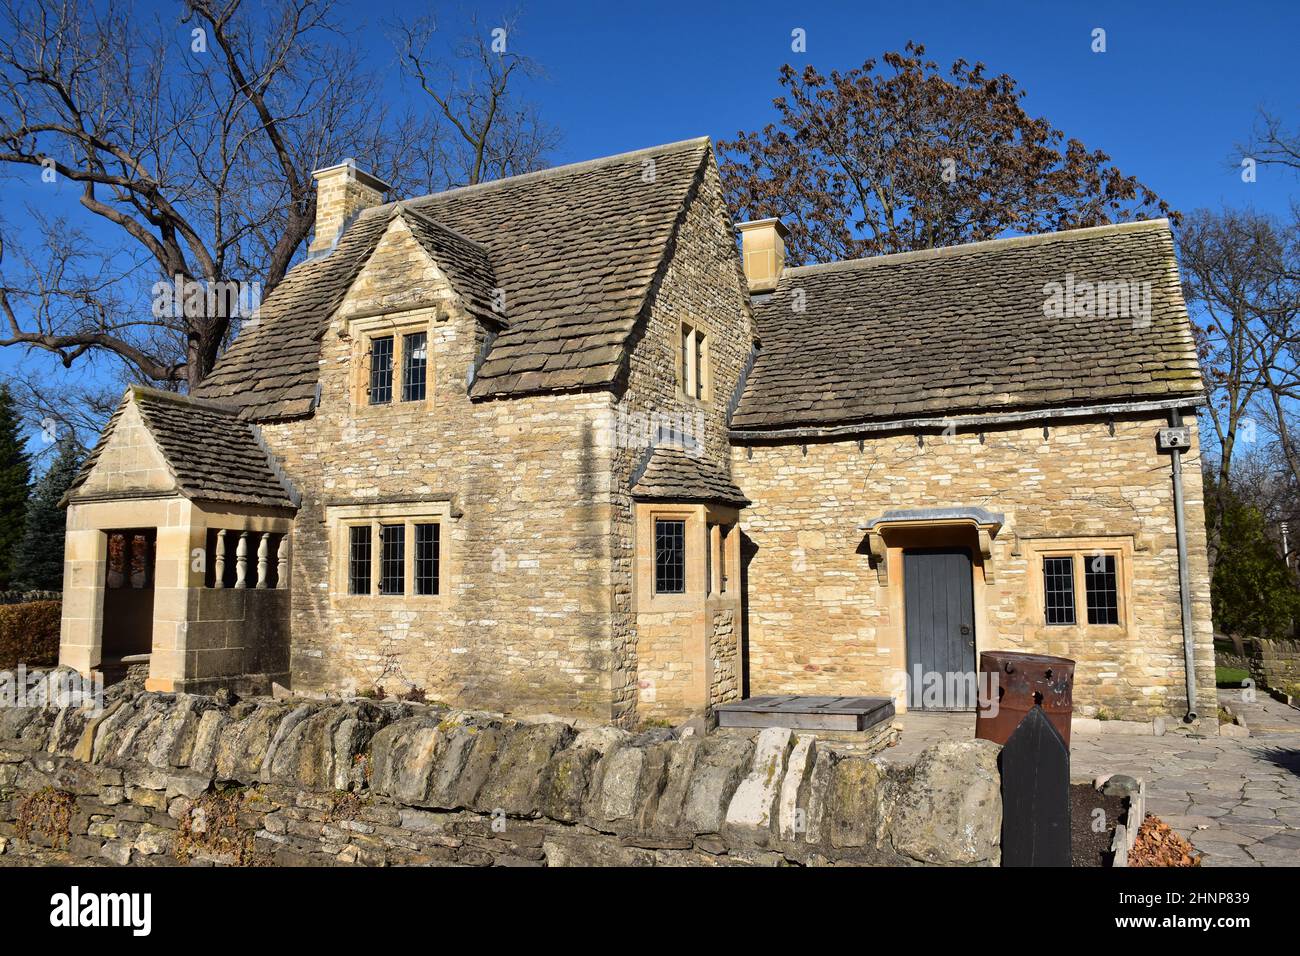 A 1619 Cotswold cottage at Greenfield Village, an 80-acre open air site & part of the Henry Ford museum complex in Dearborn, Detroit, Michigan, USA. Stock Photo